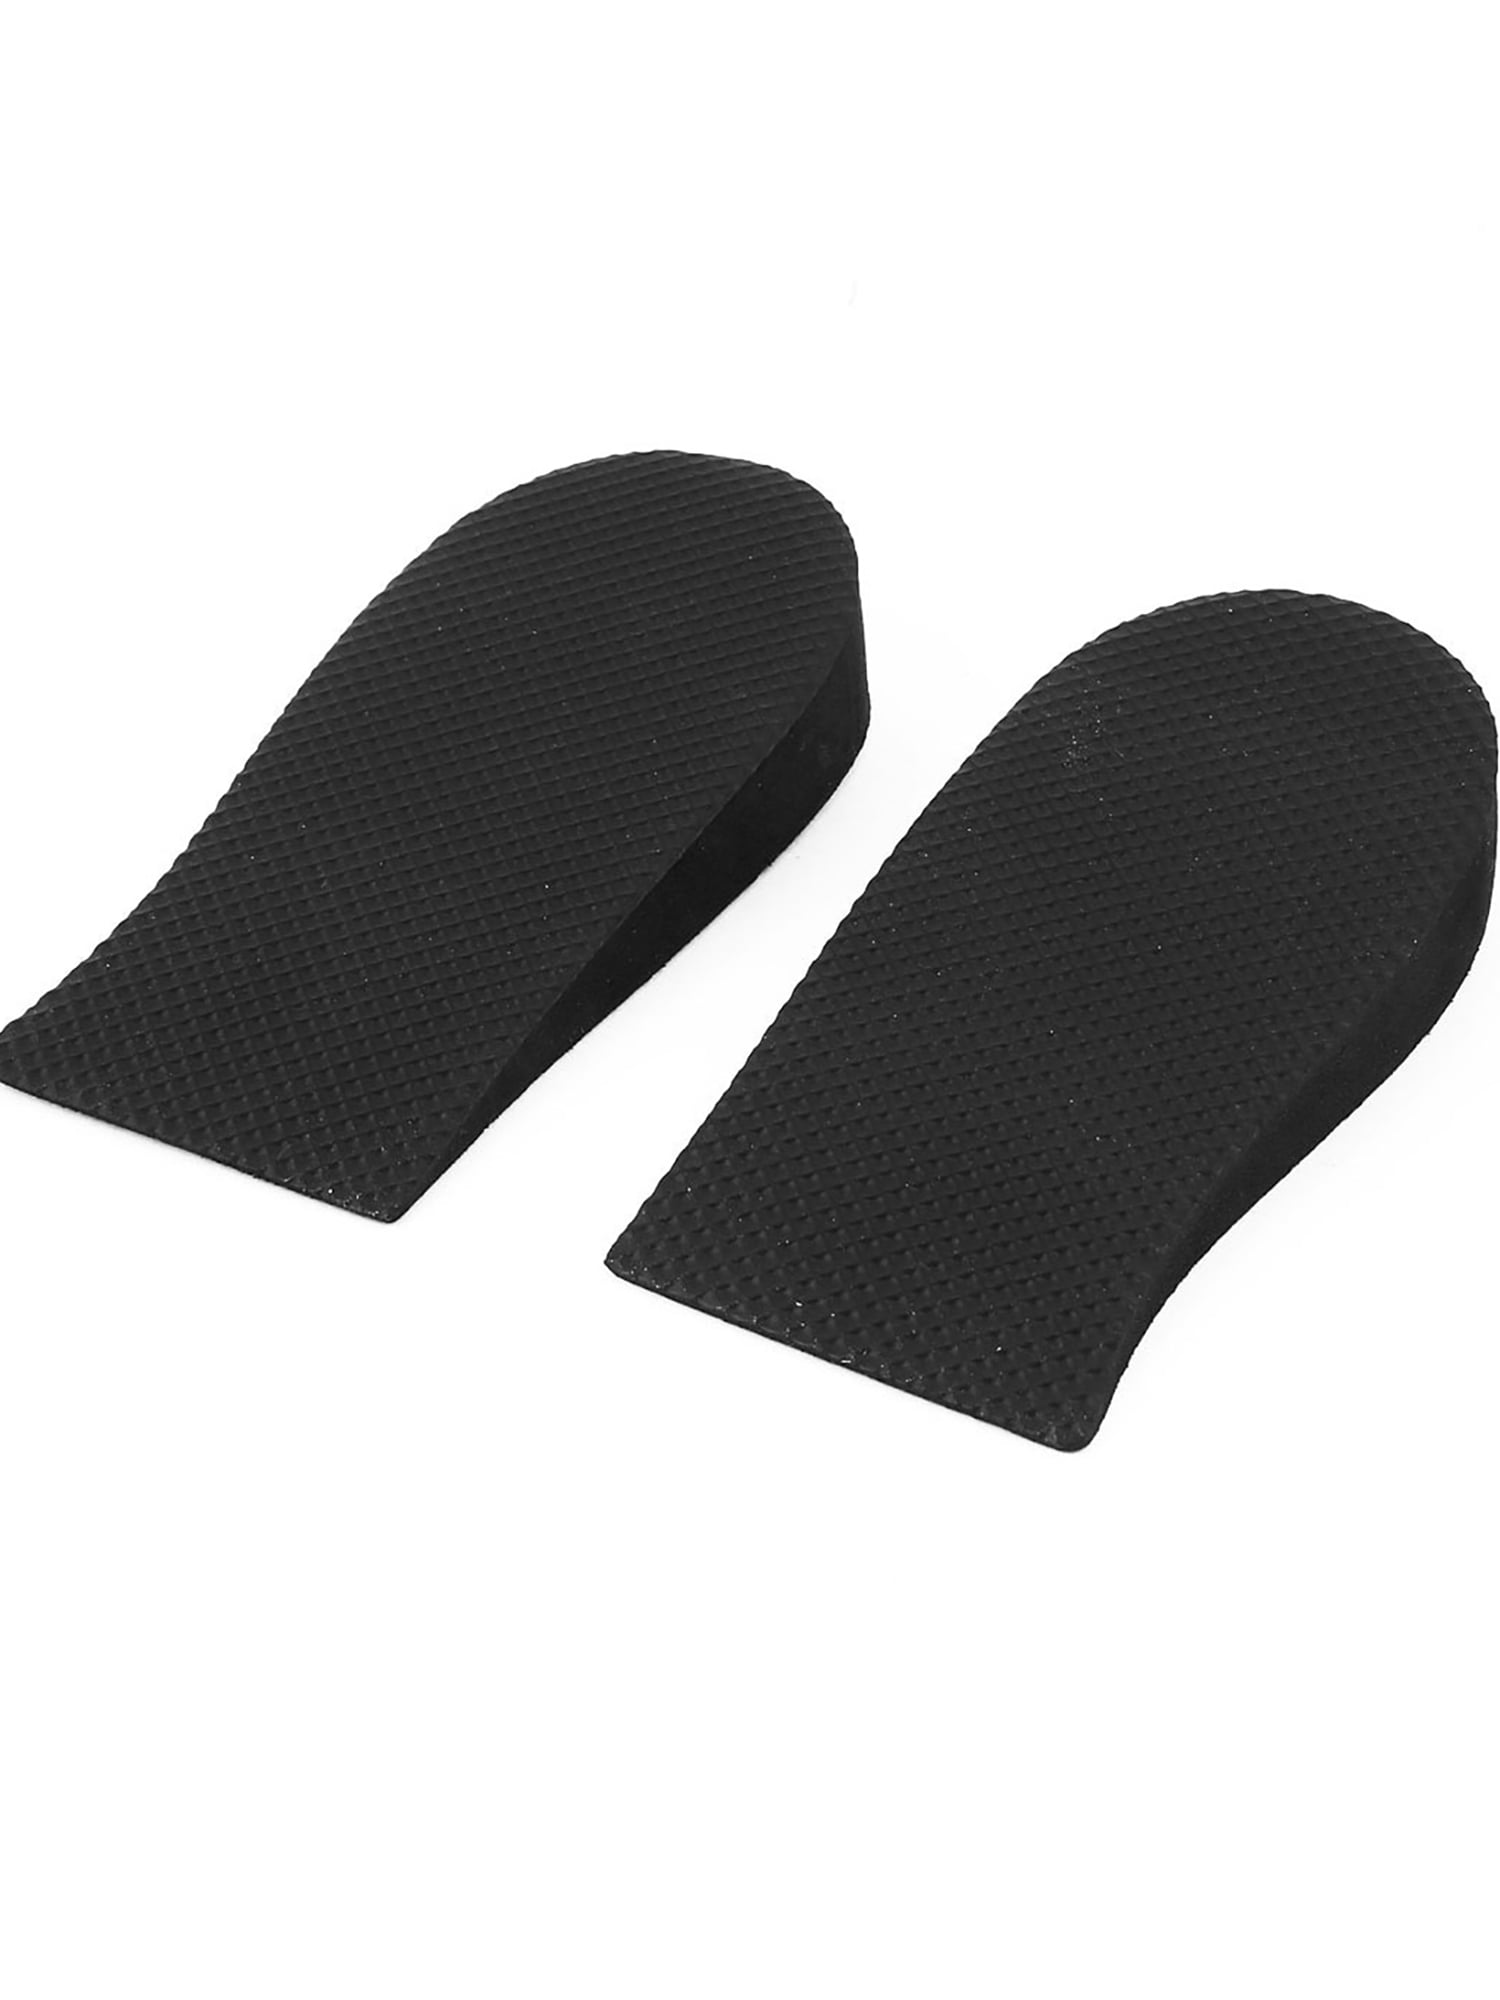 Unisex Insole Heel Lift Insert Shoe Pad Height Increase Cushion Elevator Tal*wy